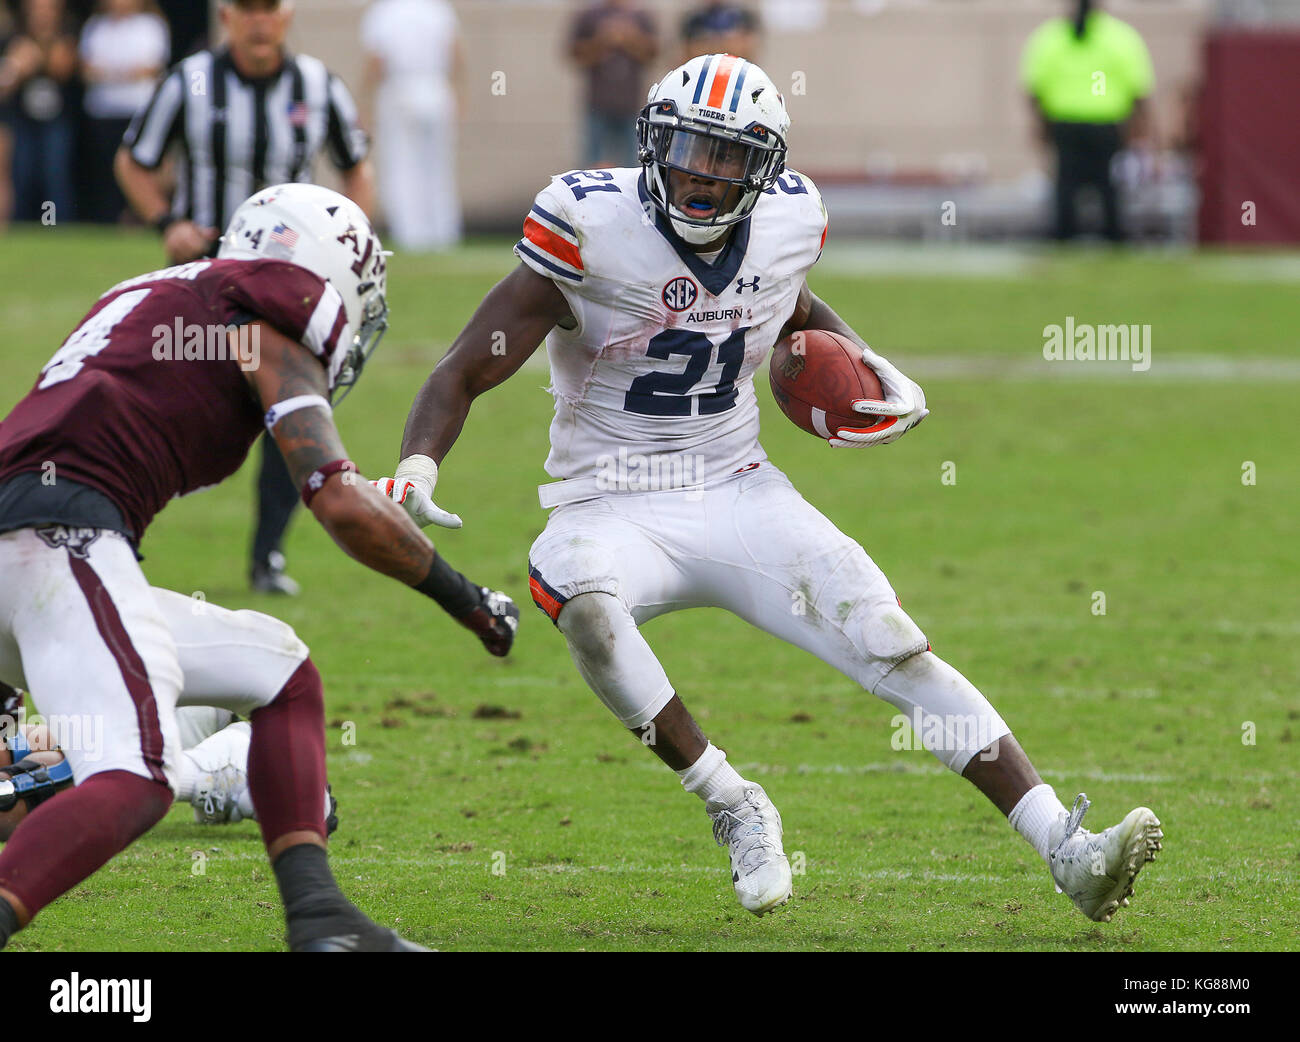 November 4, 2017: Auburn Tigers running back Kerryon Johnson (21) rushes for yards in the fourth quarter during the NCAA football game between the Auburn Tigers and the Texas A&M Aggies at Kyle Field in College Station, TX; John Glaser/CSM. Stock Photo